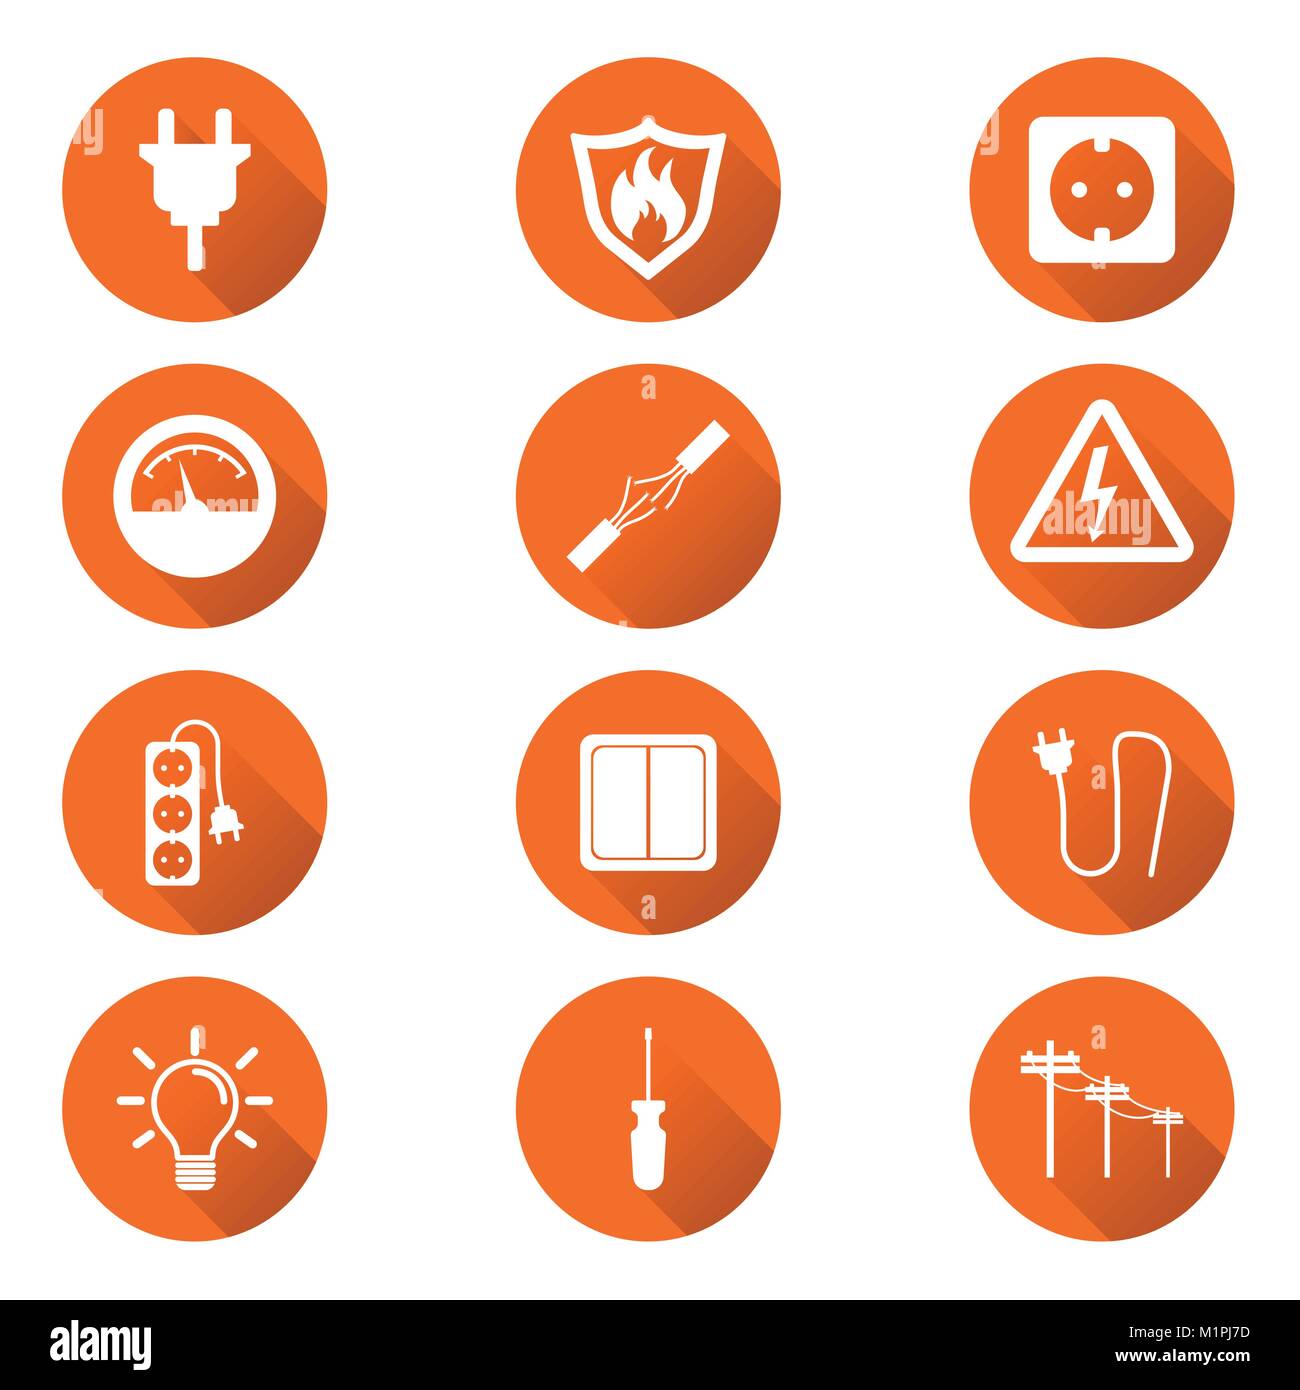 Electricity icon. Vector illustration in flat style on orange circle background with shadow. Stock Vector